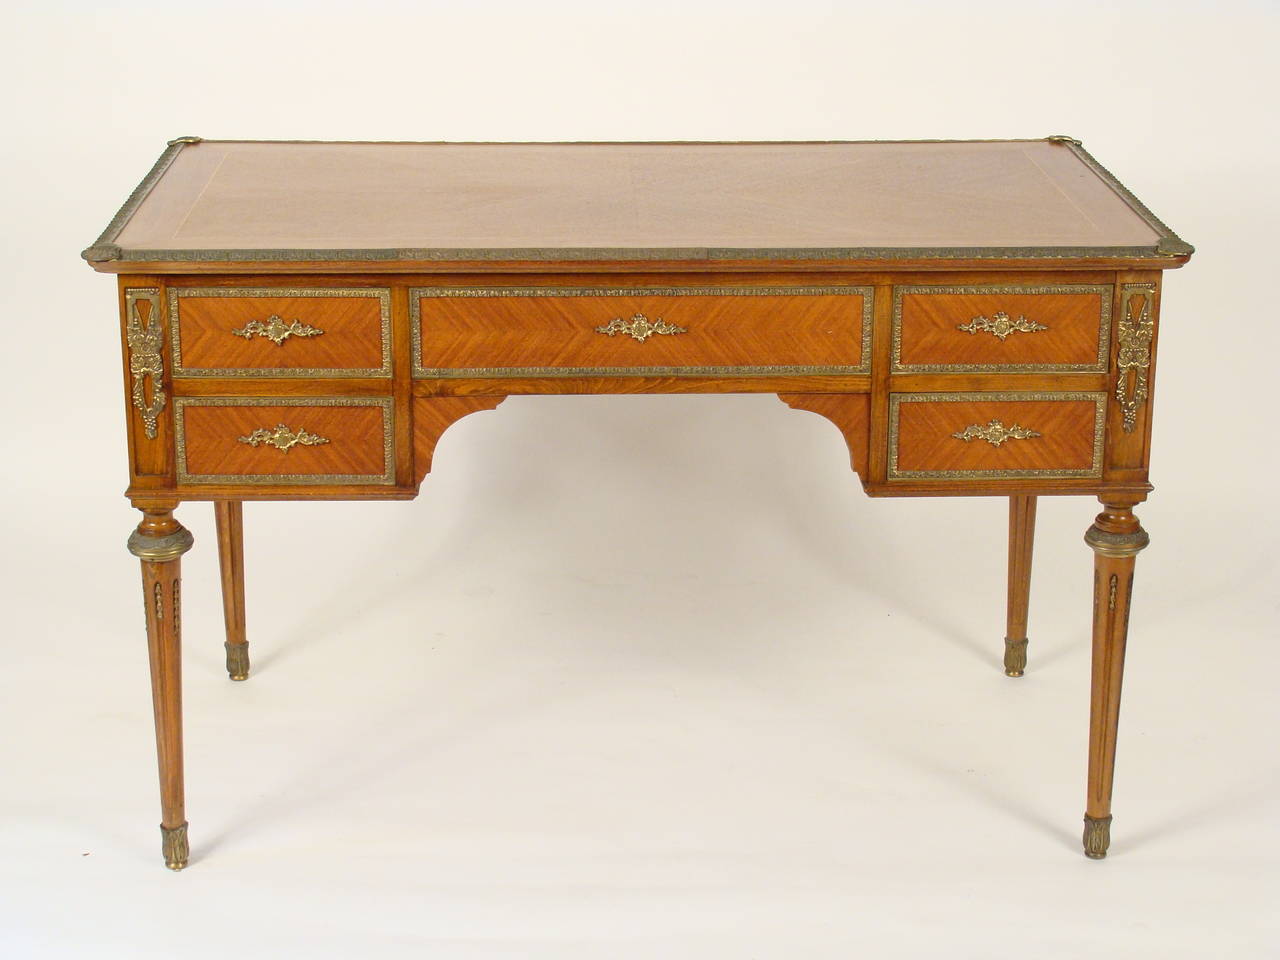 Louis XVI style mahogany brass-mounted desk made, circa 1970. Quality construction with dovetailed drawers.